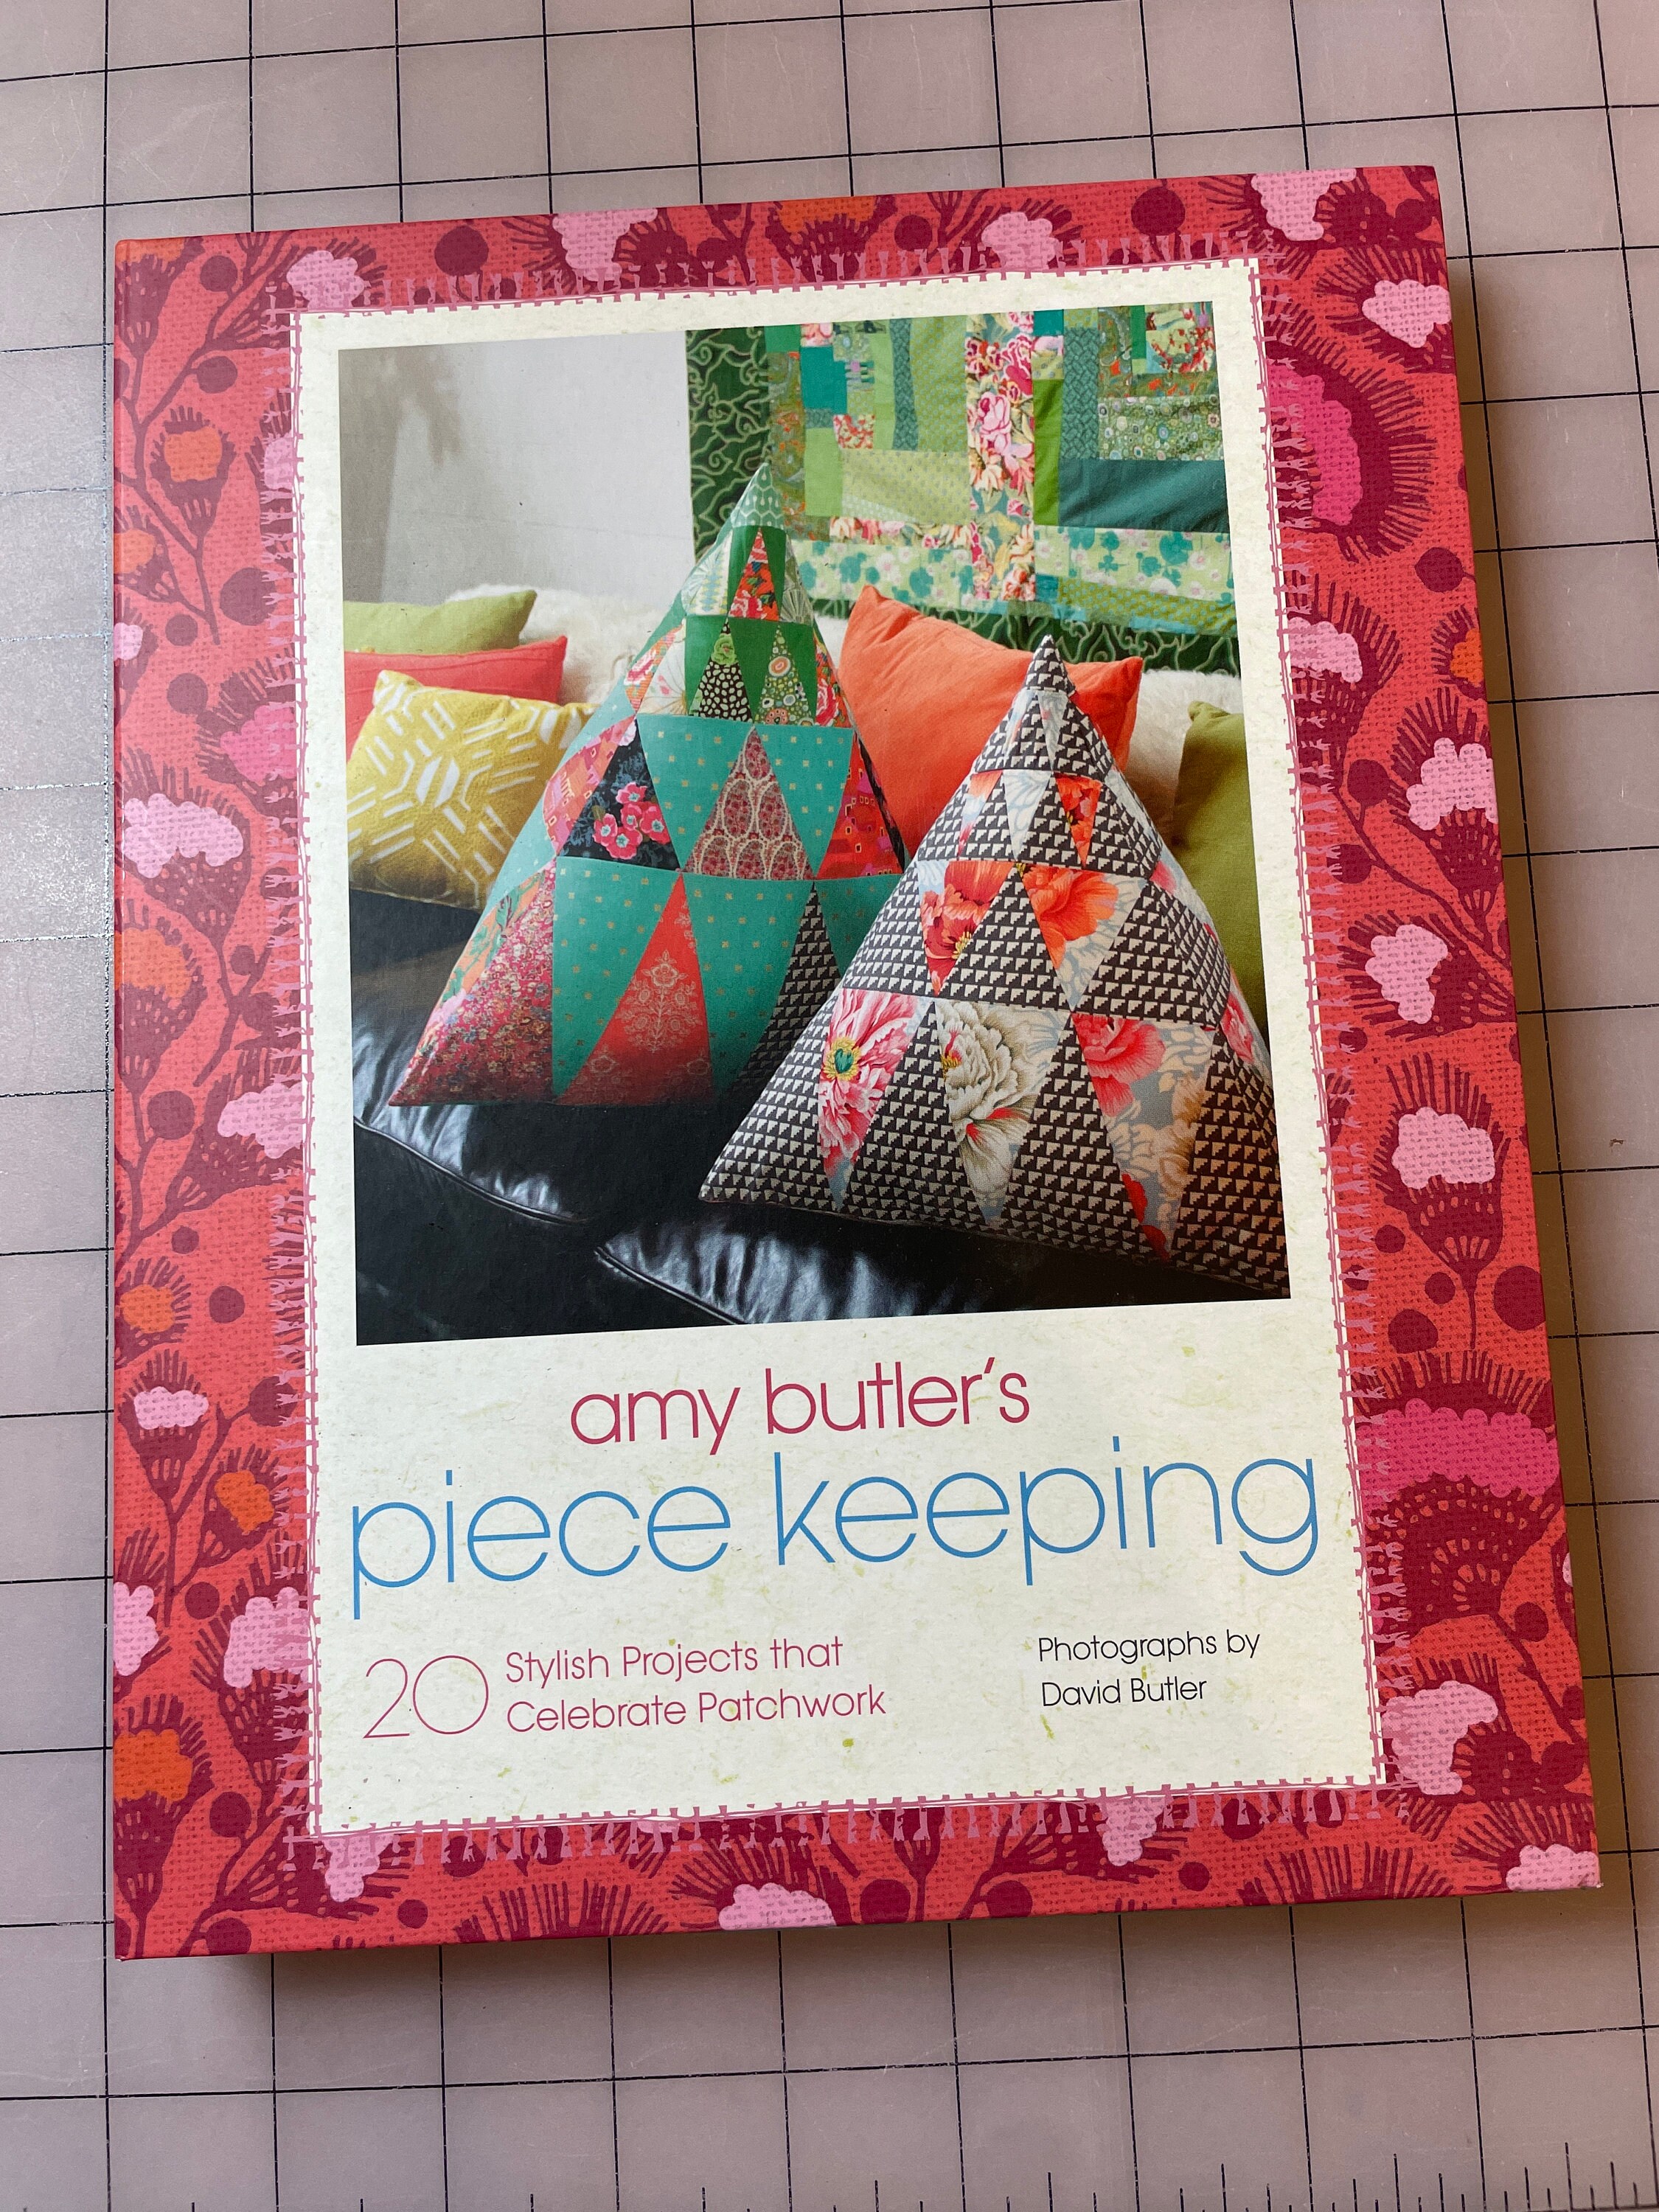 Celebrate With Quilts Book by It's Sew Emma ISE 957 